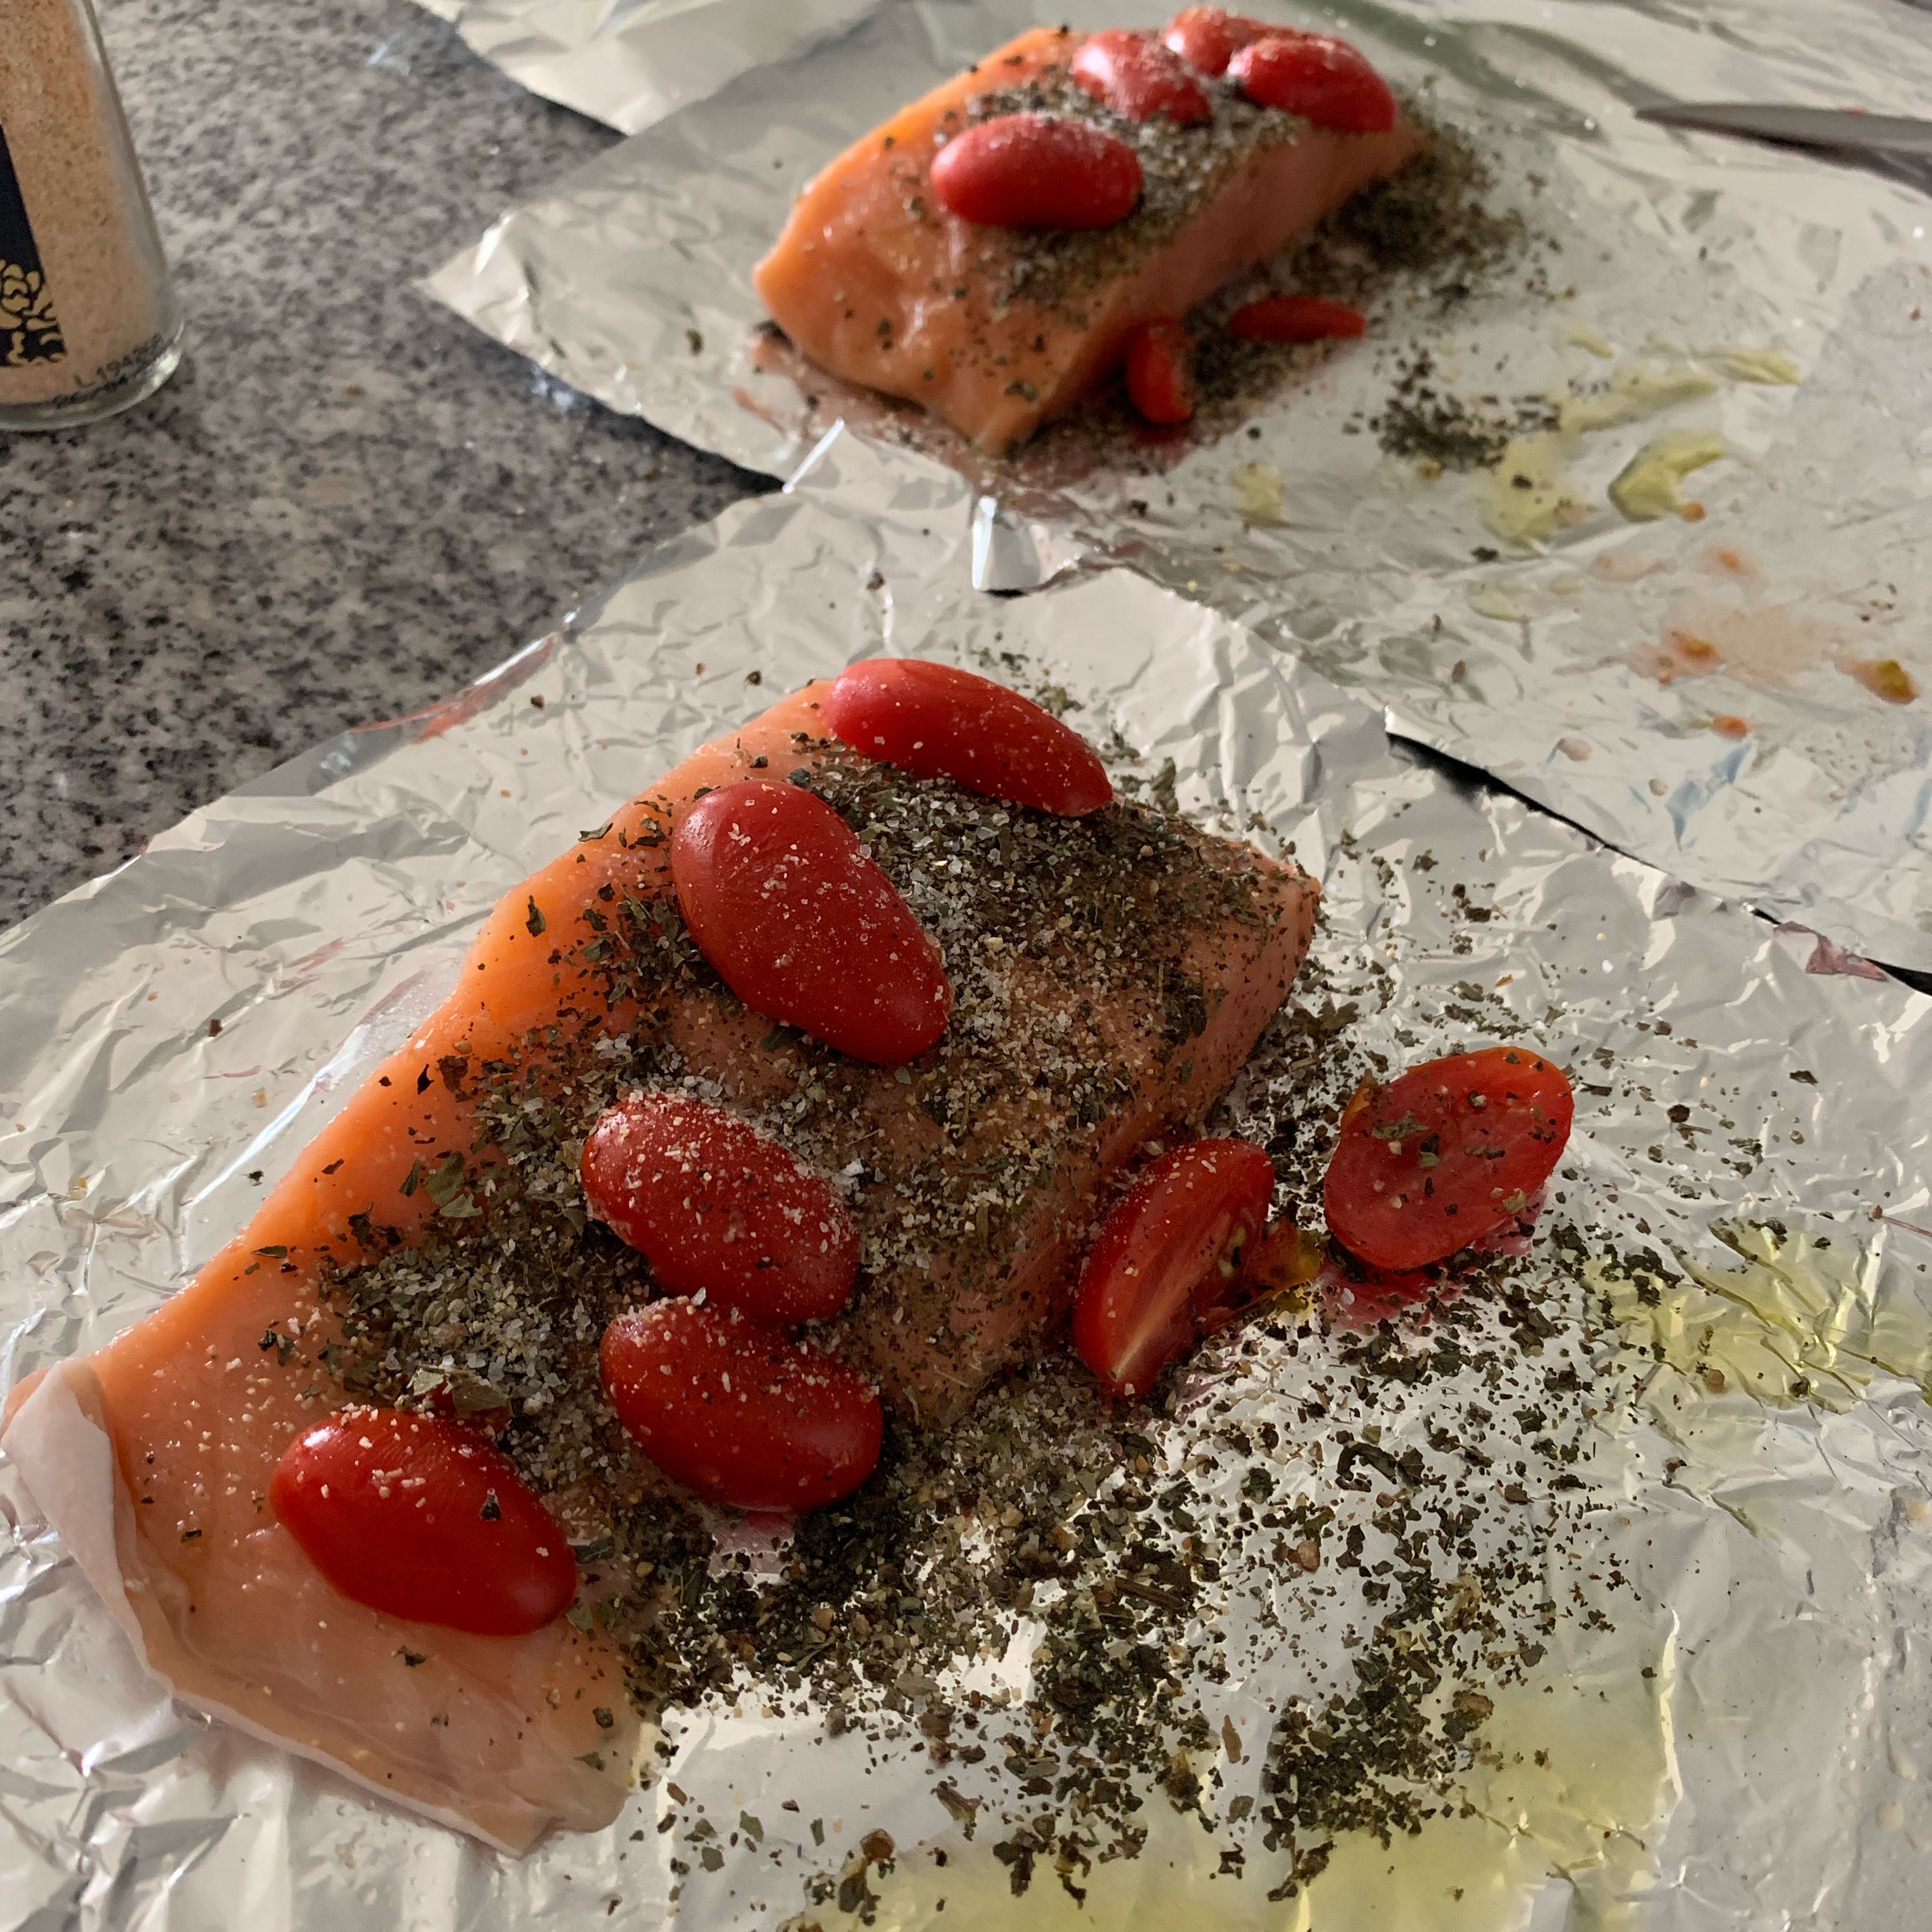 For each, place one 12—inch-Iong sheet of aluminum foil on top of another. Smear top sheet with 1/2 tablespoon olive oil, and layer a fillet of salmon, 6 tomato halves, salt and pepper, 4 basil leaves and another half tablespoon oil. Add garlic powder on both fillets. Add pepper and salt to taste. Seal package (I like to seal them with skin looking up, to avoid the skin to adhere into the aluminum).